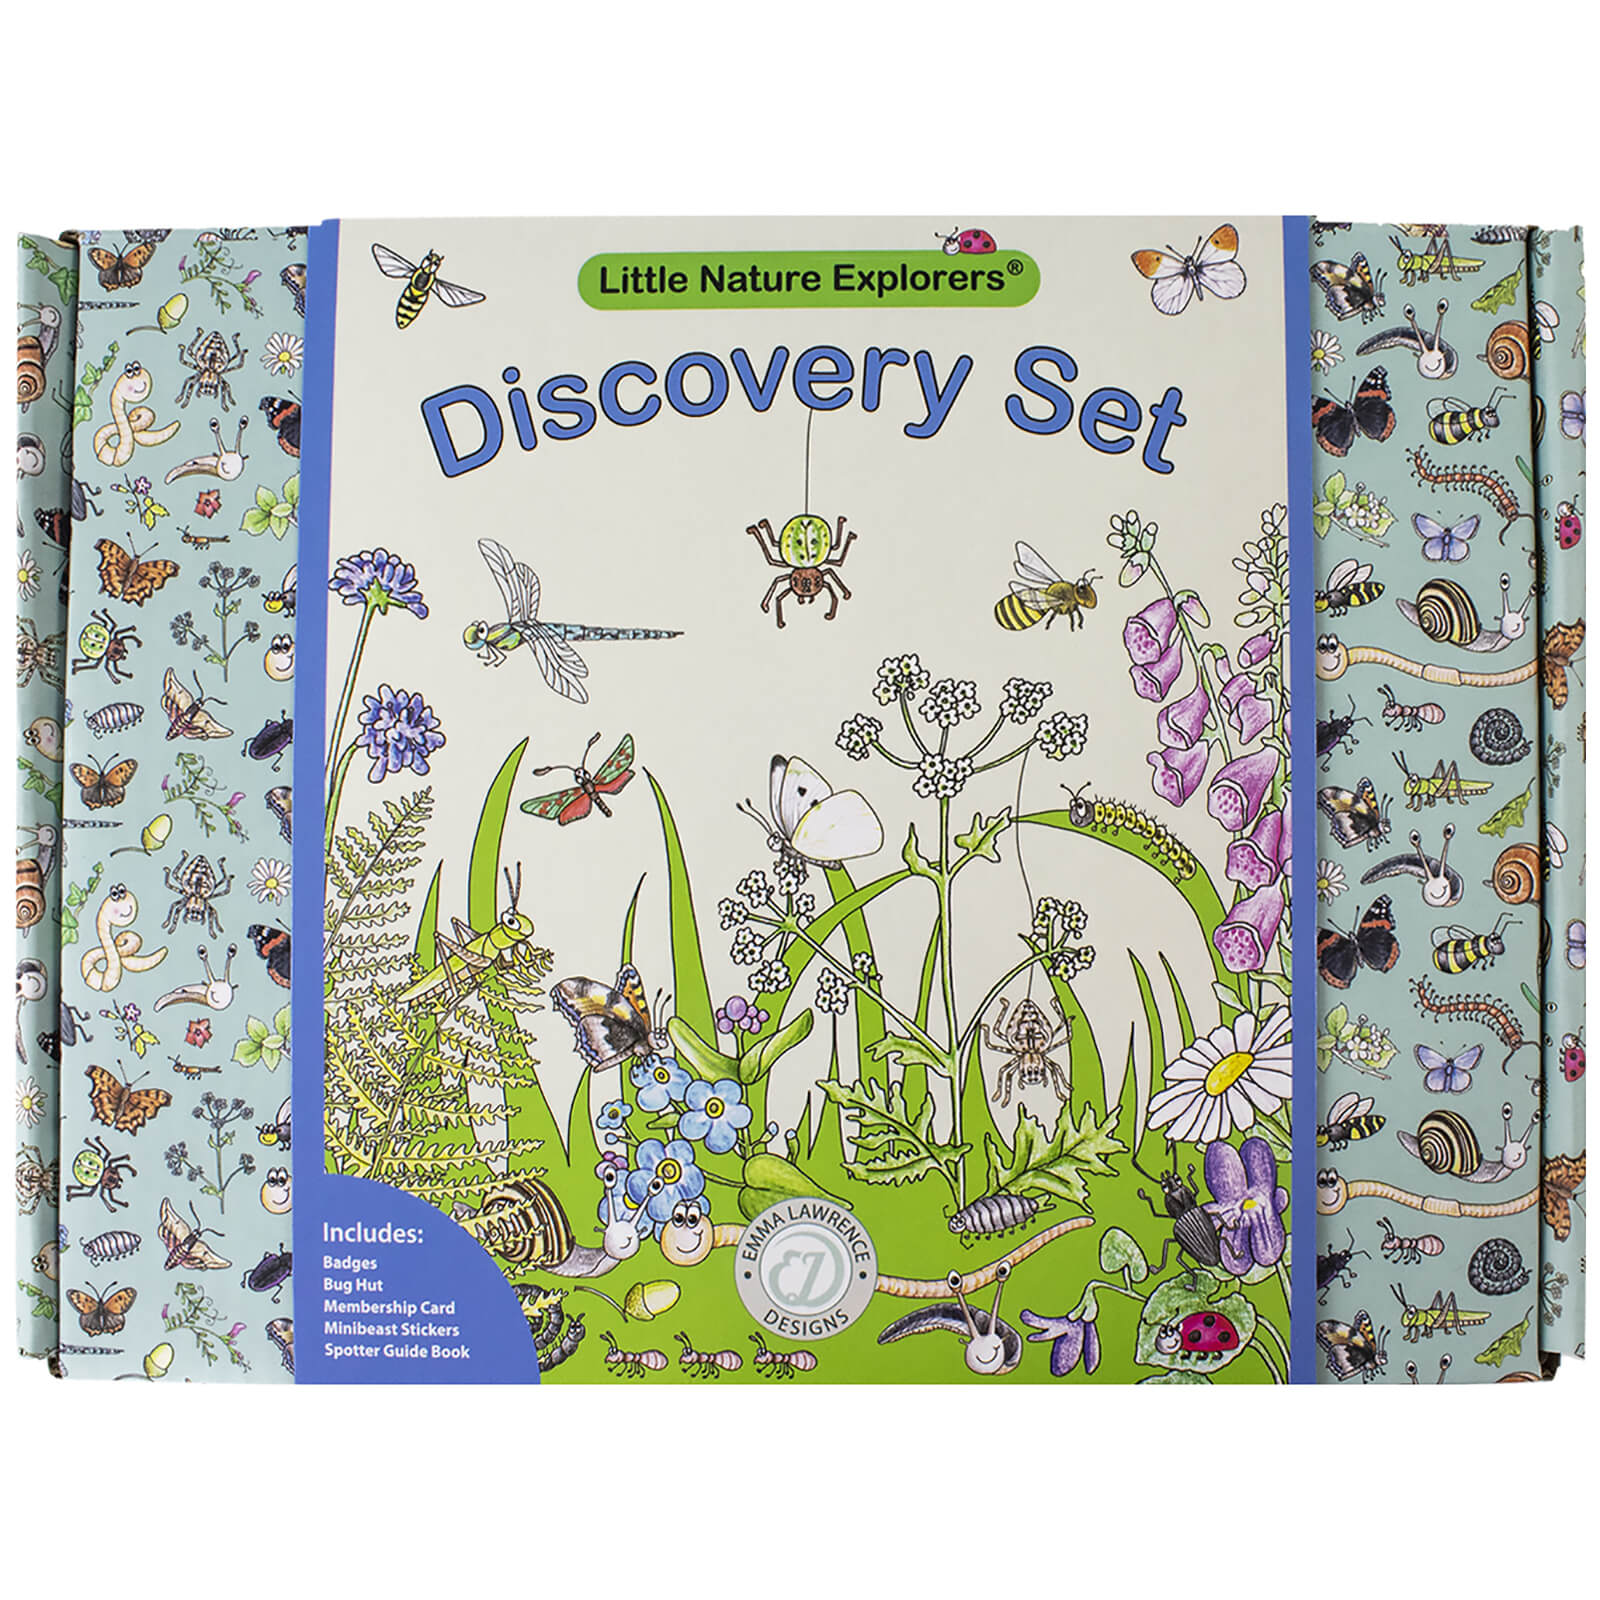 Little Nature Explorers - Discovery Set